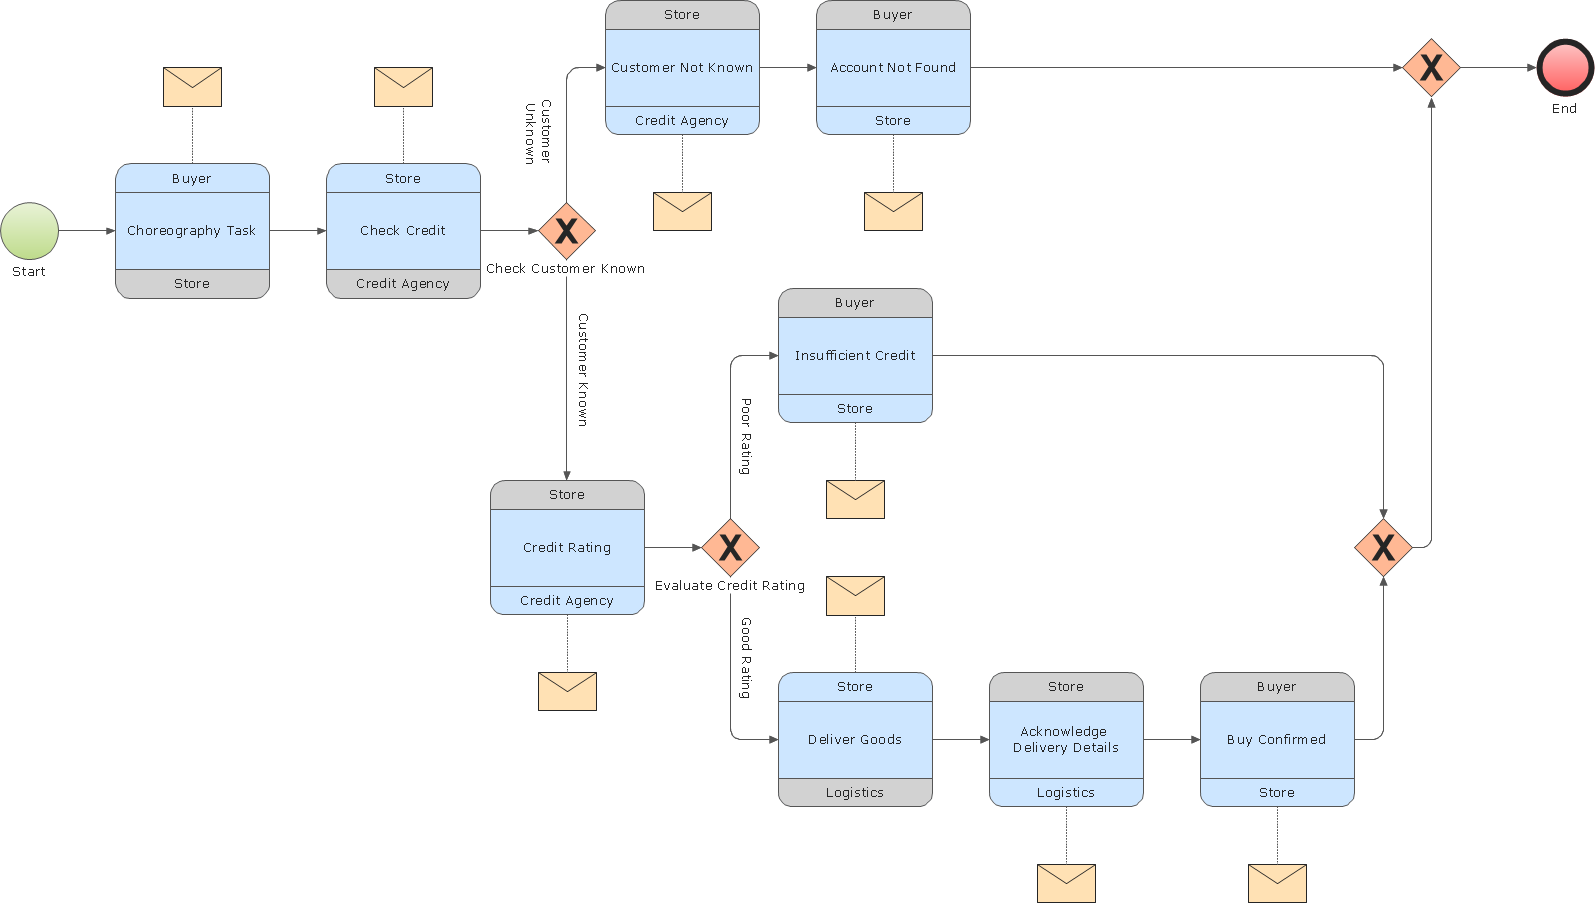 business process model and notation visio